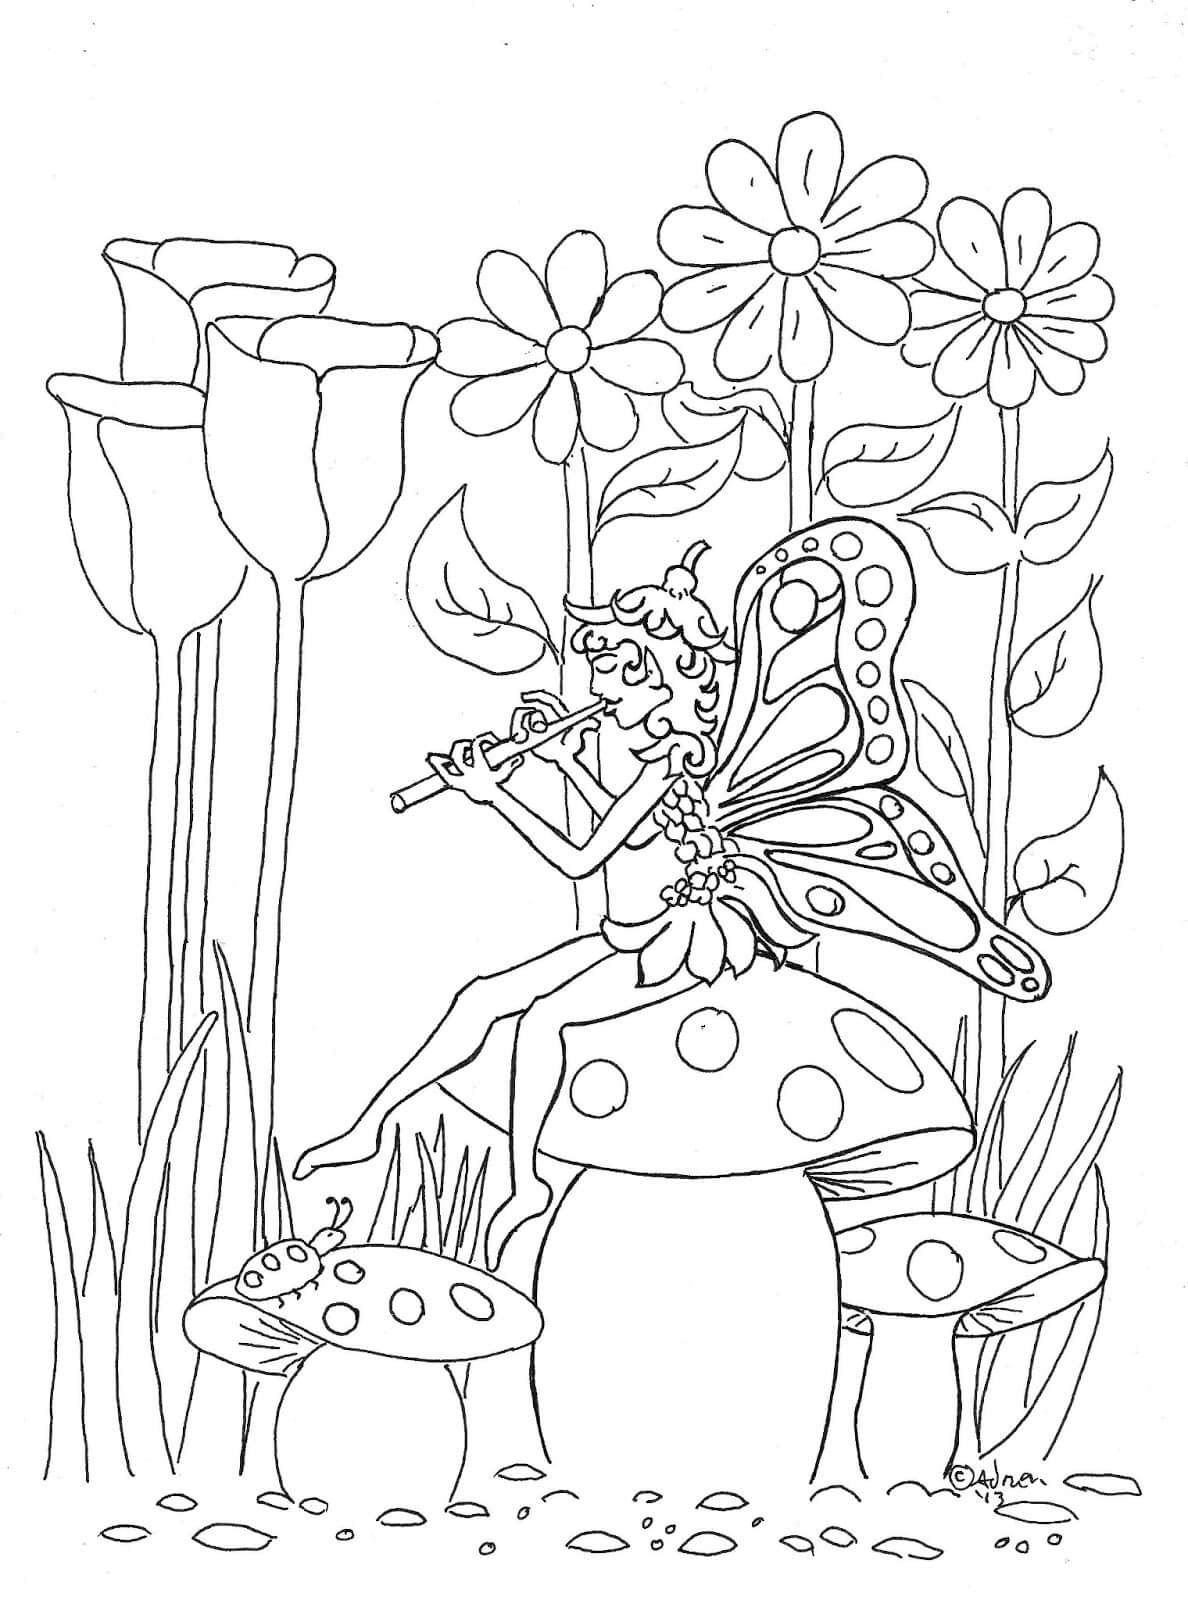 Music Fairy in Garden Coloring Page